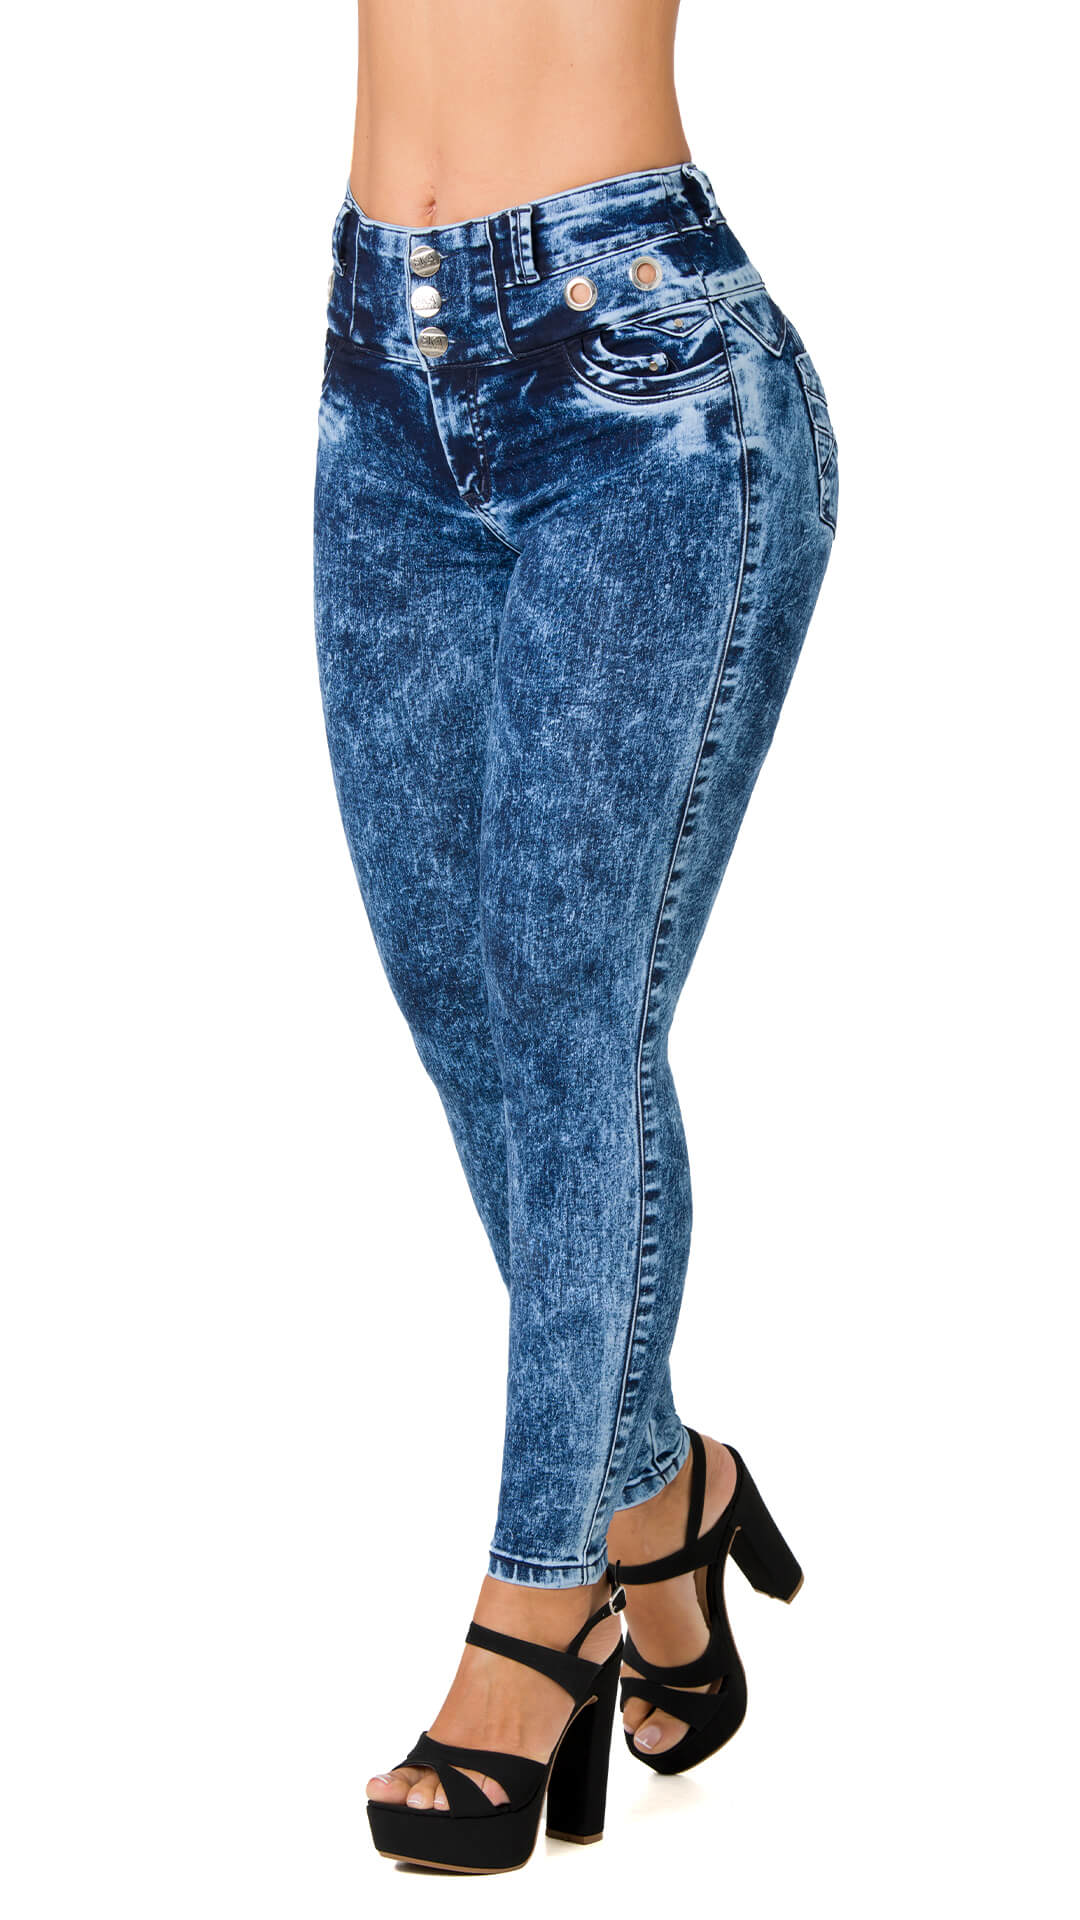 Fashionista Butt-Lifting Jeans by Bon Bon Up 3810 - Hourglass Angel